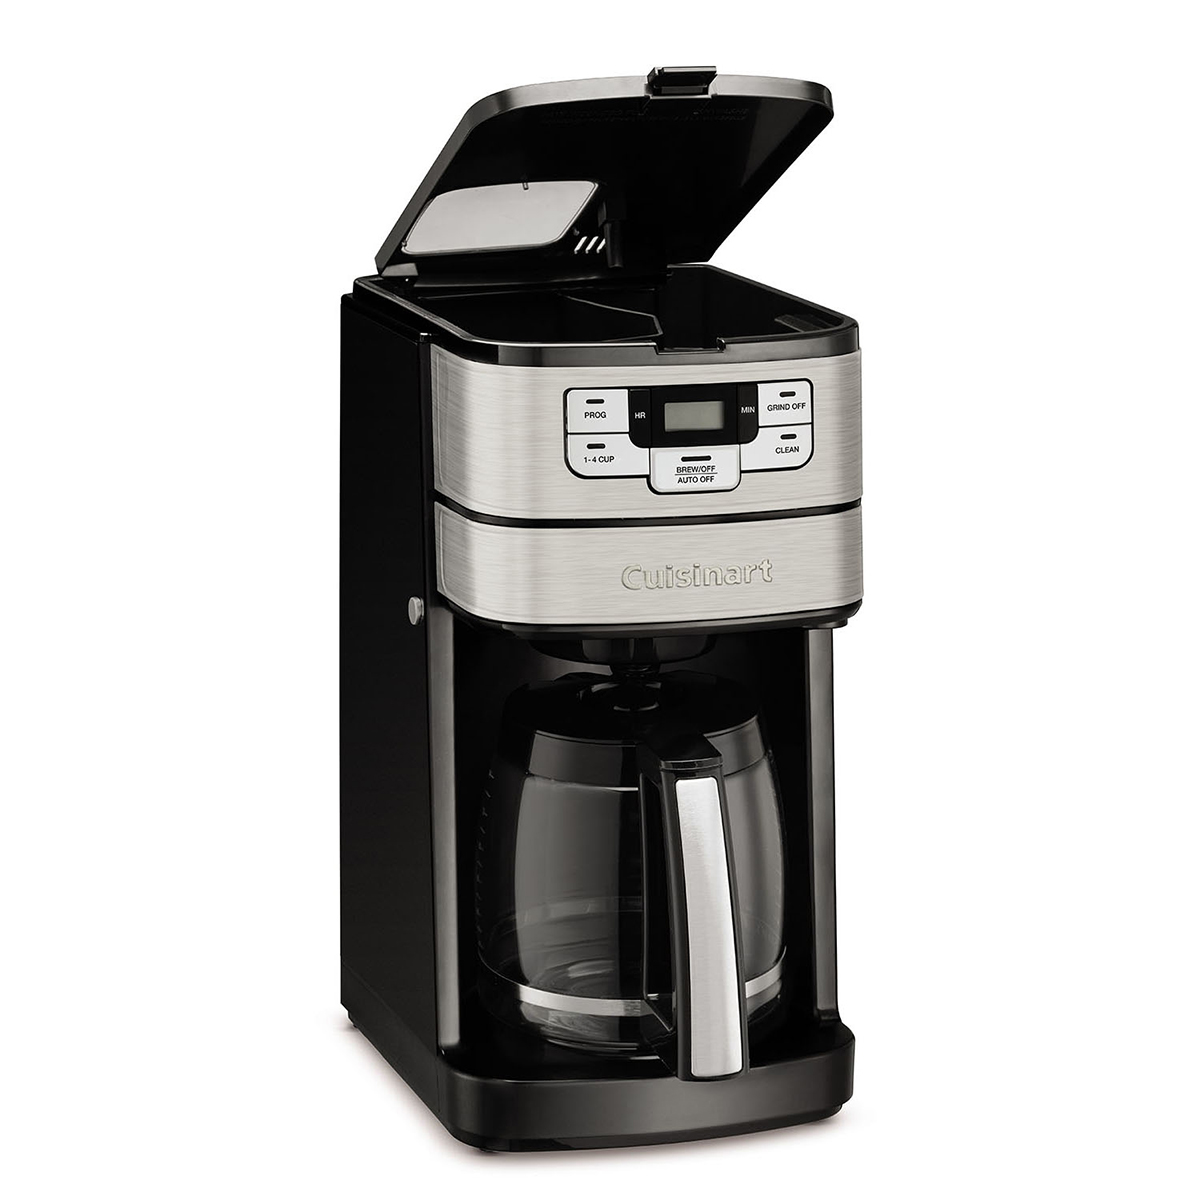 Cuisinart(R) Automatic Grind & Brew 12-Cup Coffee Maker